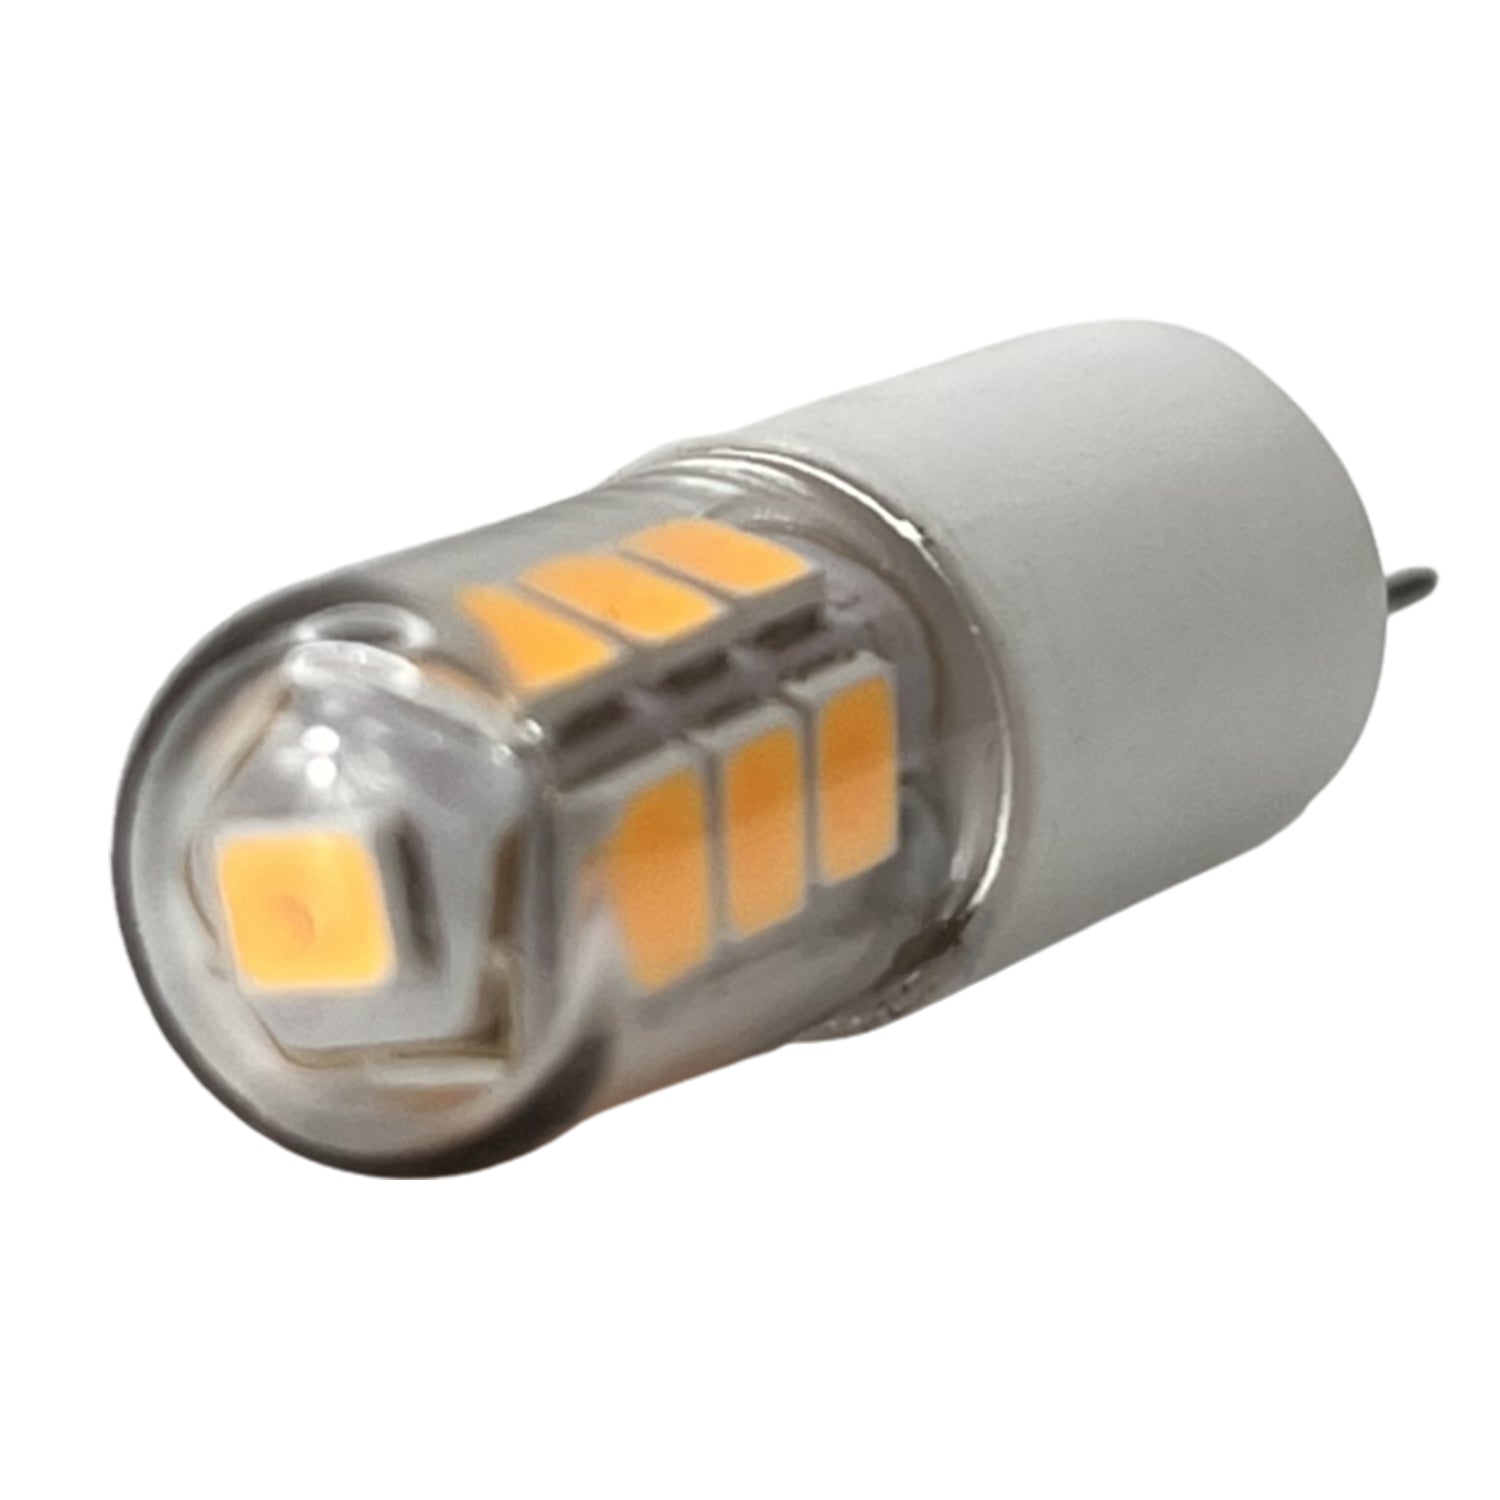 Ampoule LED G4 SMD 2,5W 2700K dimmable